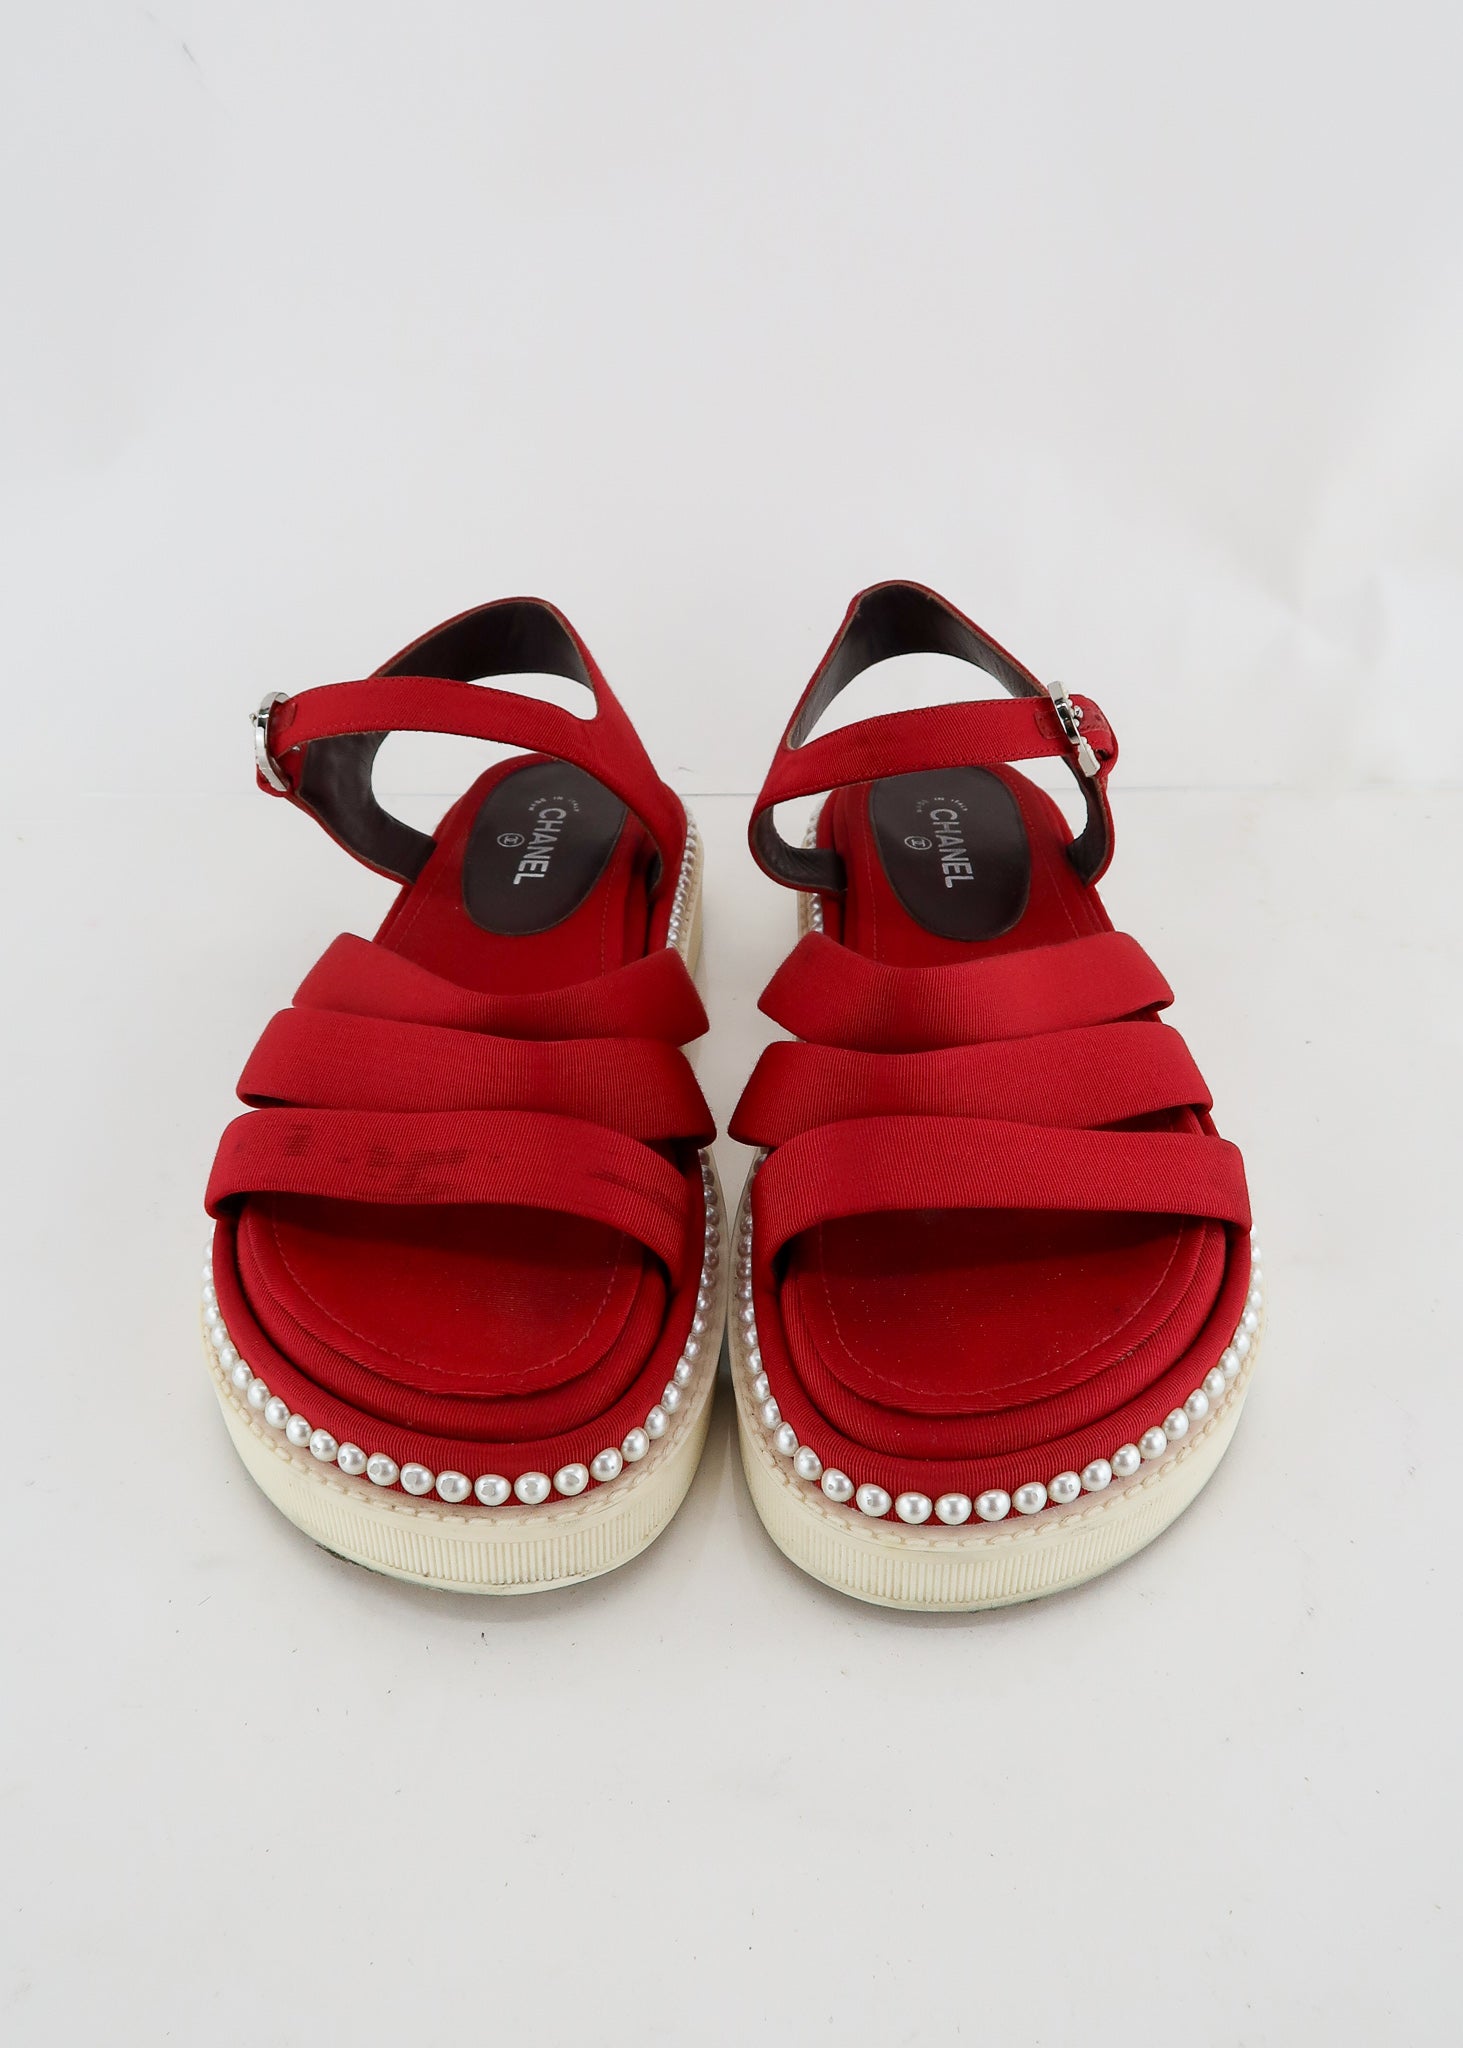 Chanel Pearl Sandals Red – DAC